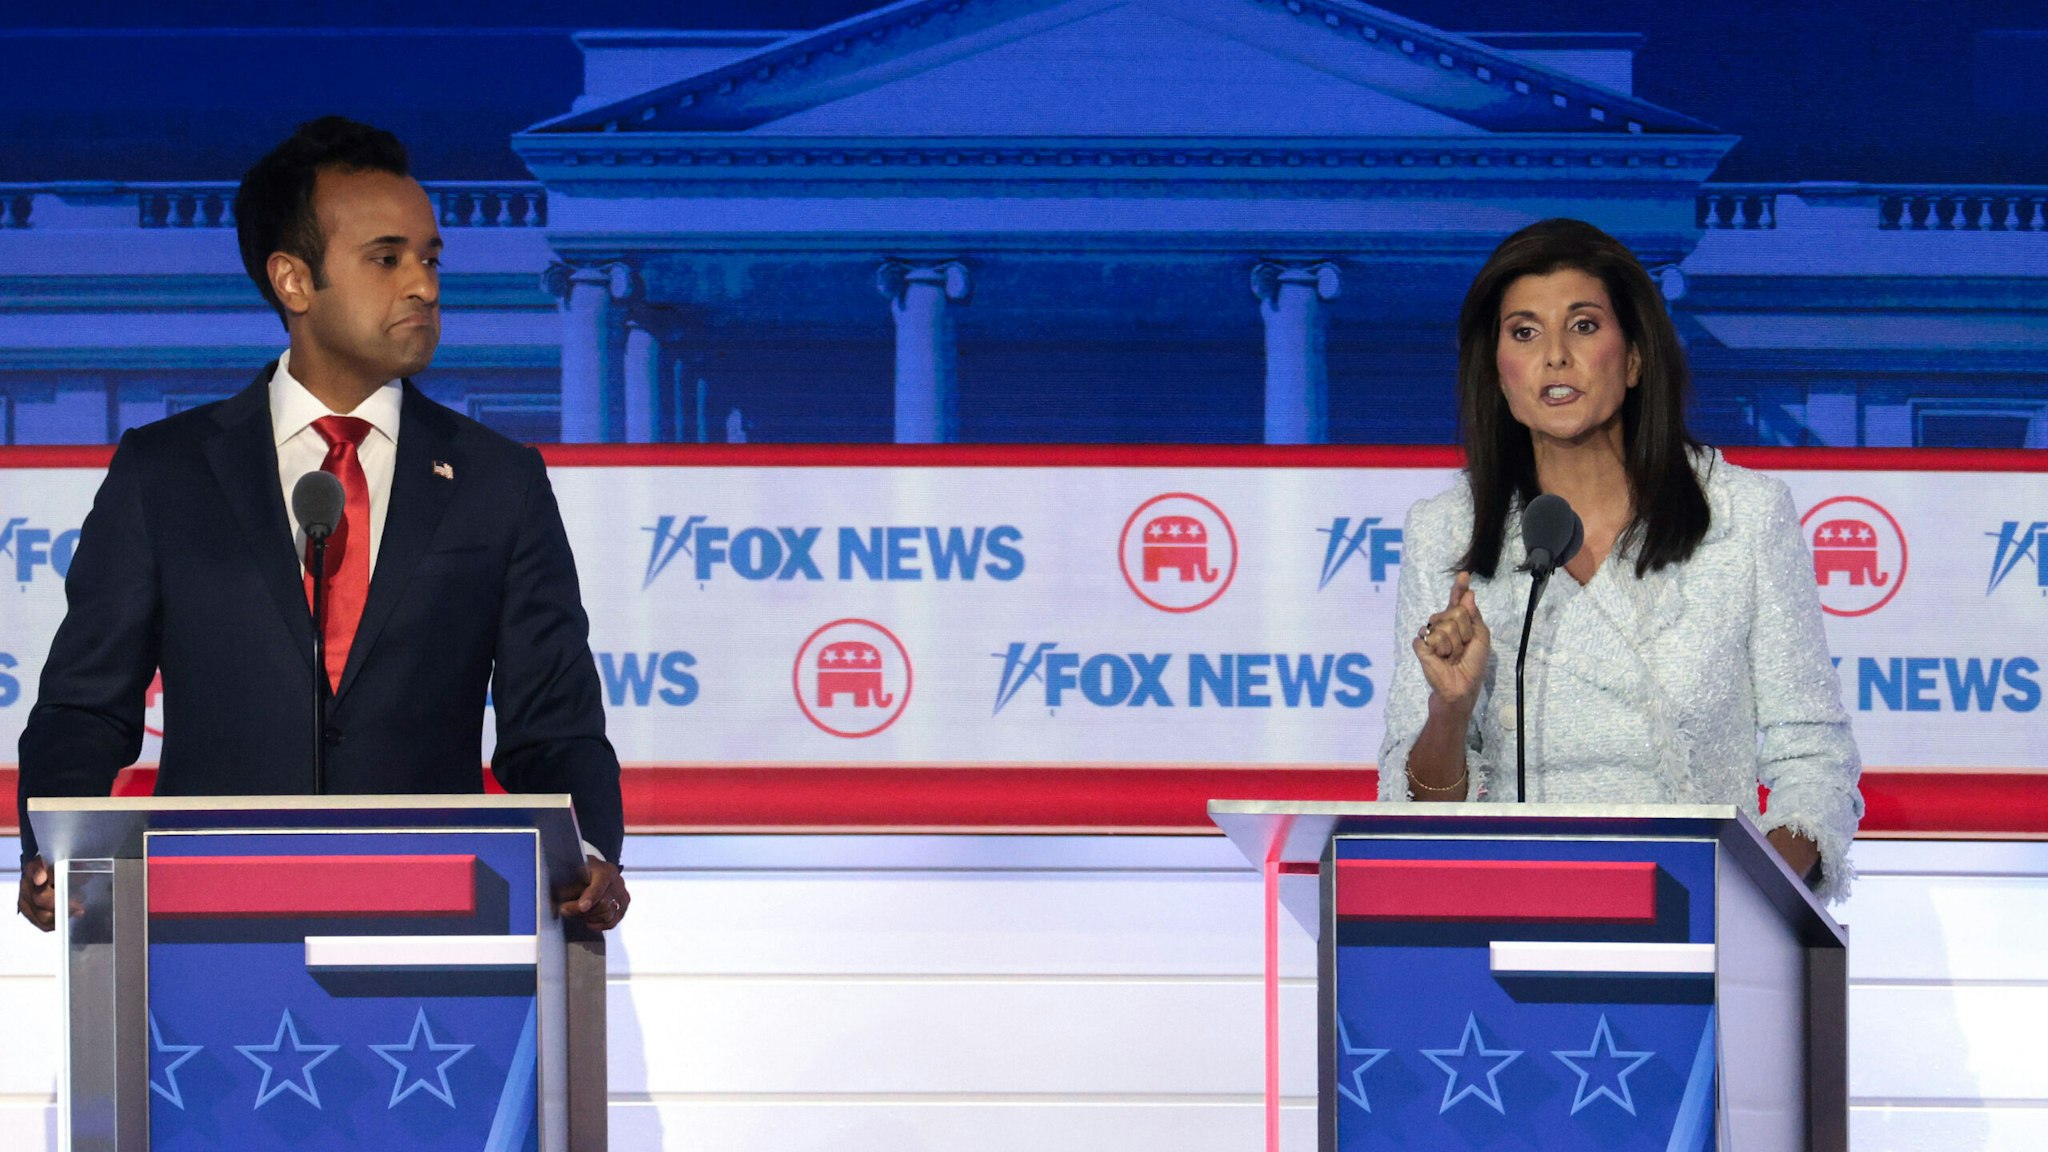 MILWAUKEE, WISCONSIN - AUGUST 23: Republican presidential candidates (L-R), Vivek Ramaswamy and former U.N. Ambassador Nikki Haley participate in the first debate of the GOP primary season hosted by FOX News at the Fiserv Forum on August 23, 2023 in Milwaukee, Wisconsin. Eight presidential hopefuls squared off in the first Republican debate as former U.S. President Donald Trump, currently facing indictments in four locations, declined to participate in the event.